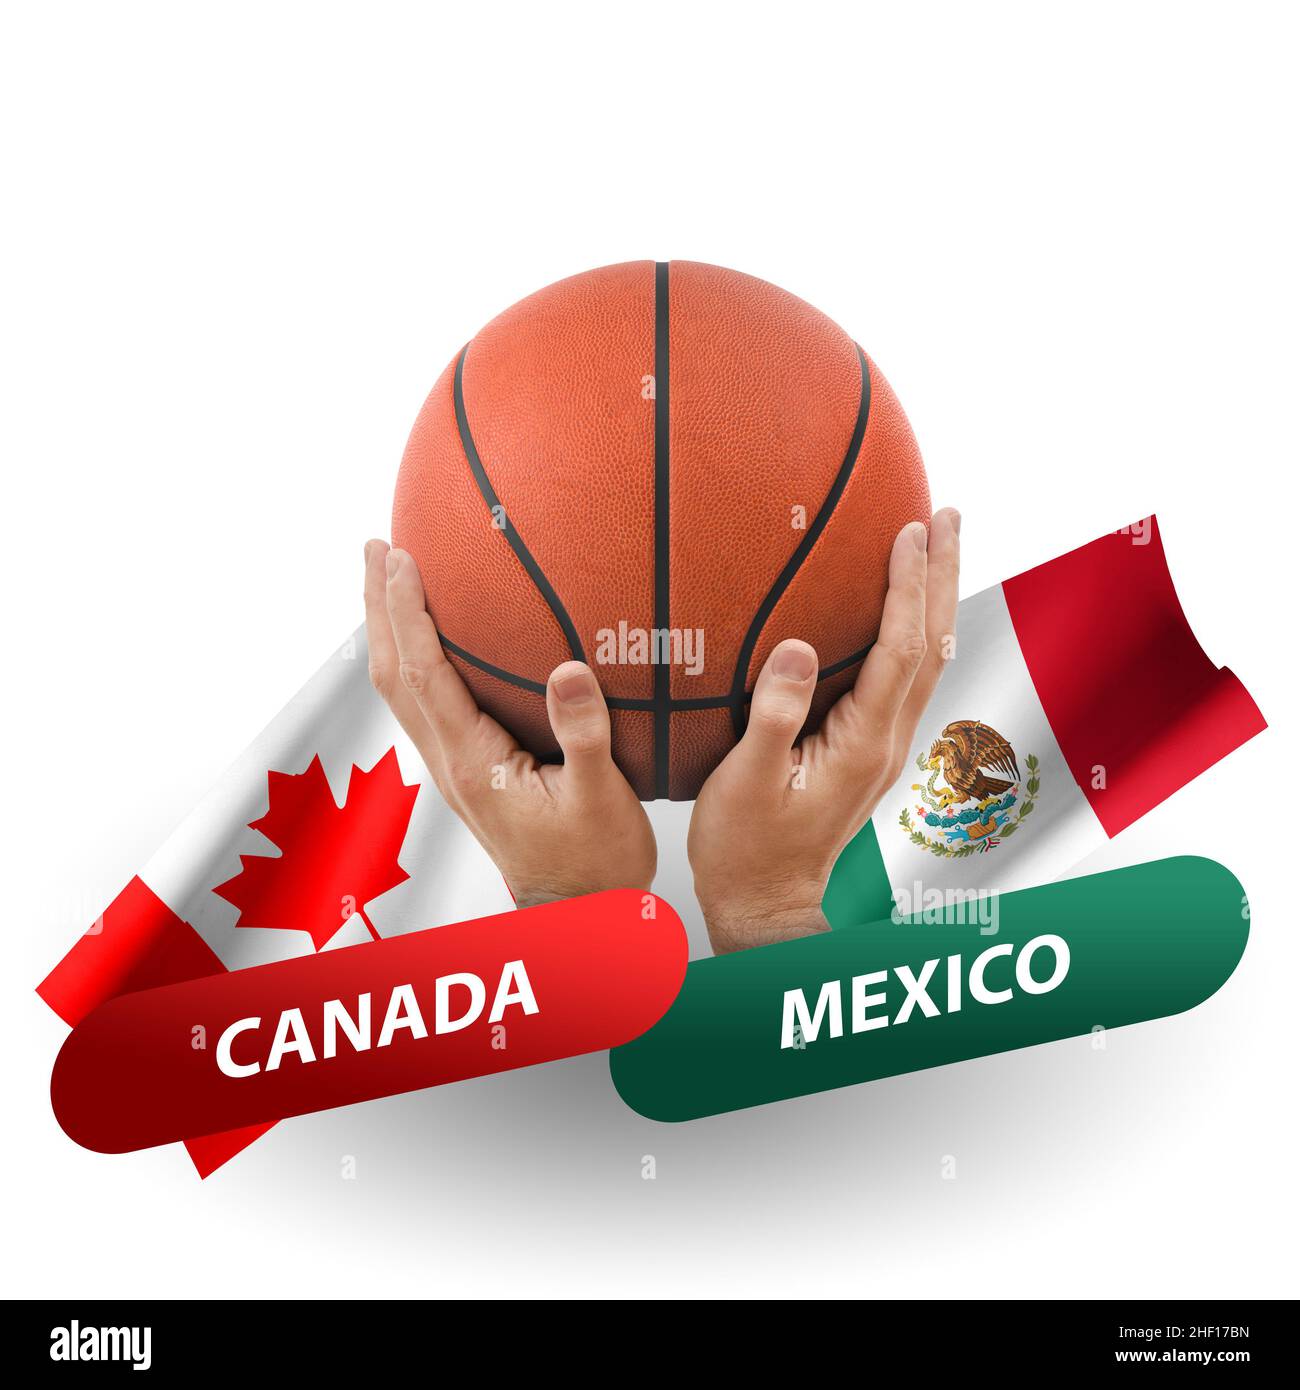 Mexico vs canada Cut Out Stock Images & Pictures - Alamy